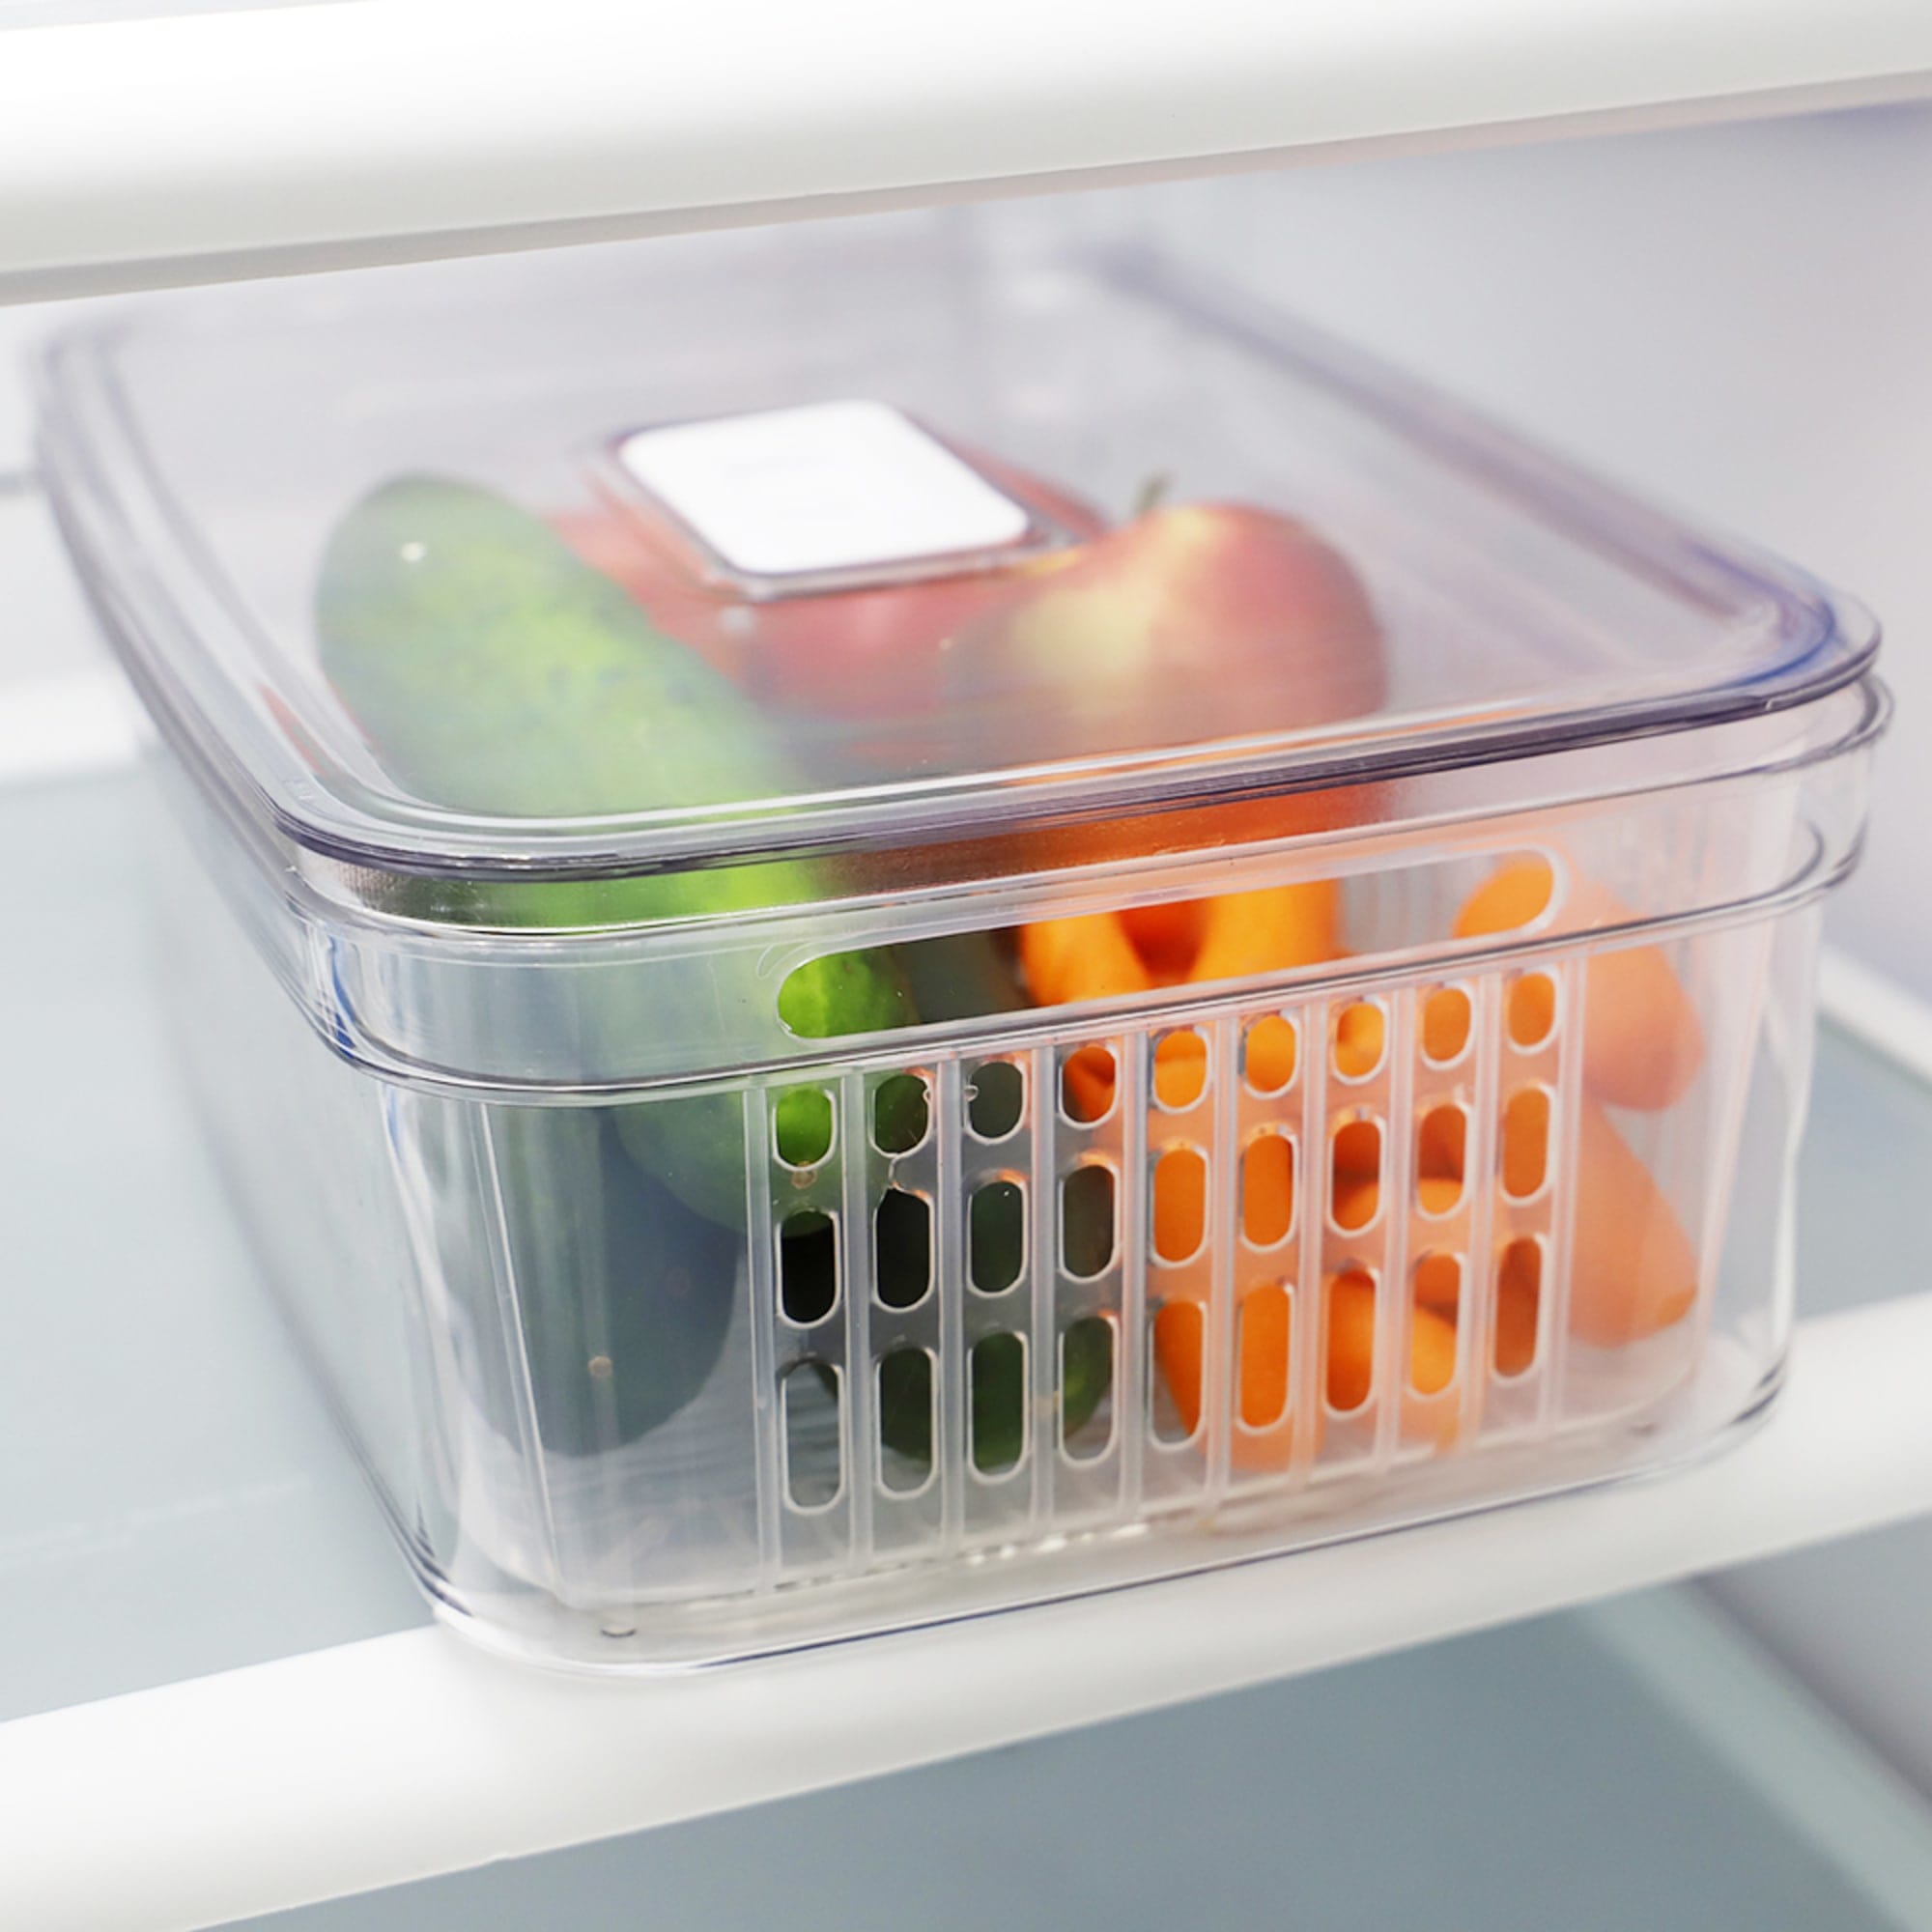 Fridge Storage Containers Produce Keepers With Lid And Colander